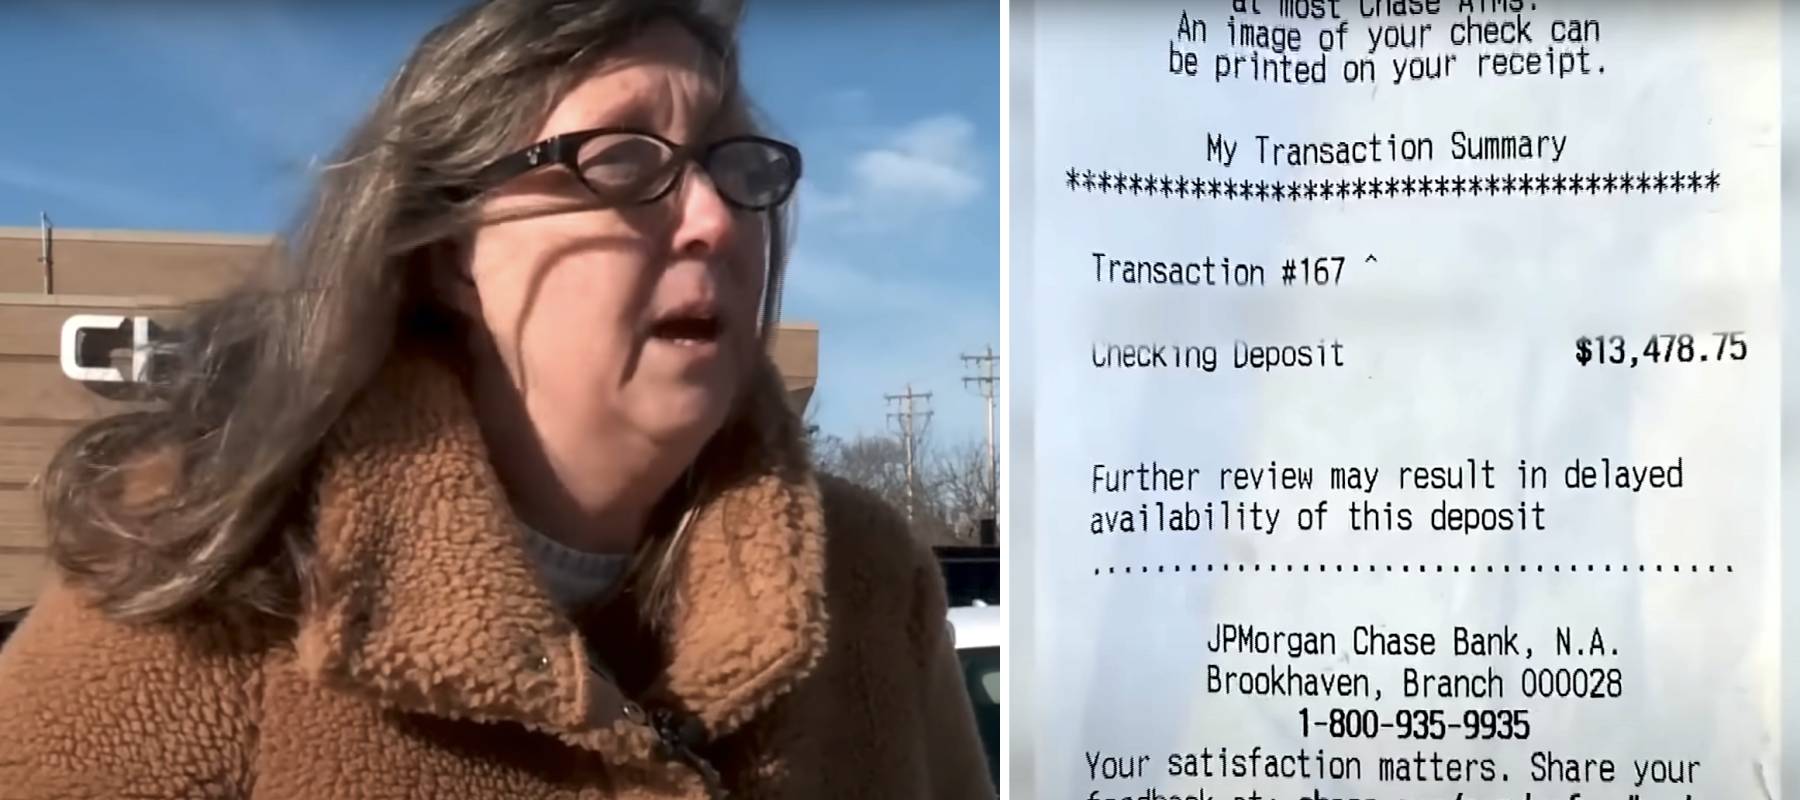 Carla Garling told KFOR Oklahoma&#039;s News 4 she deposited a check worth nearly $13,500, but the funds didn&#039;t show up in her bank account.